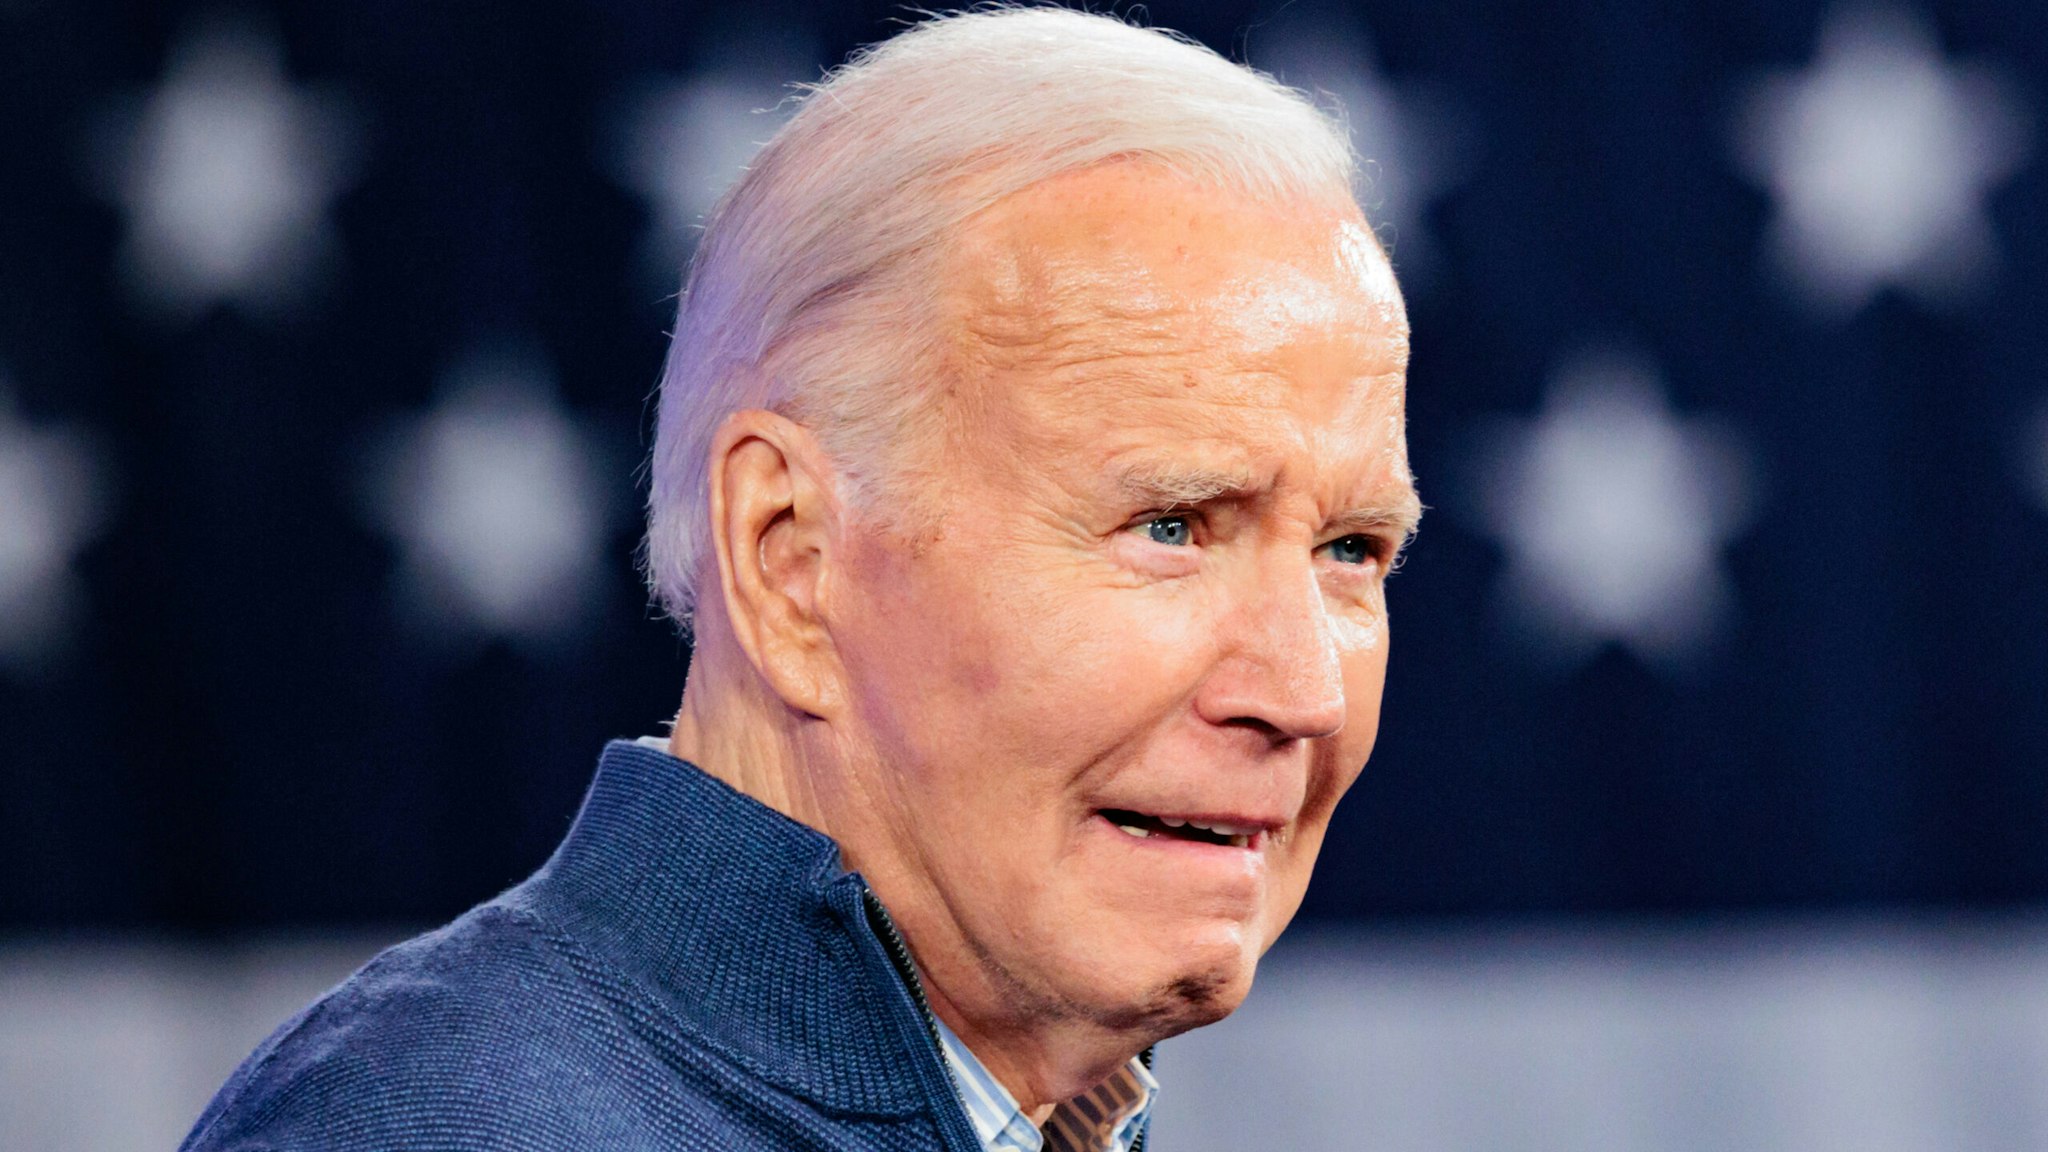 US President Joe Biden during a campaign event at Strath Haven Middle School in Wallingford, Pennsylvania, US, on Friday, March 8, 2024. Biden predicted the Federal Reserve would soon cut rates, as the administration places greater emphasis on housing costs in its election fight against Donald Trump.